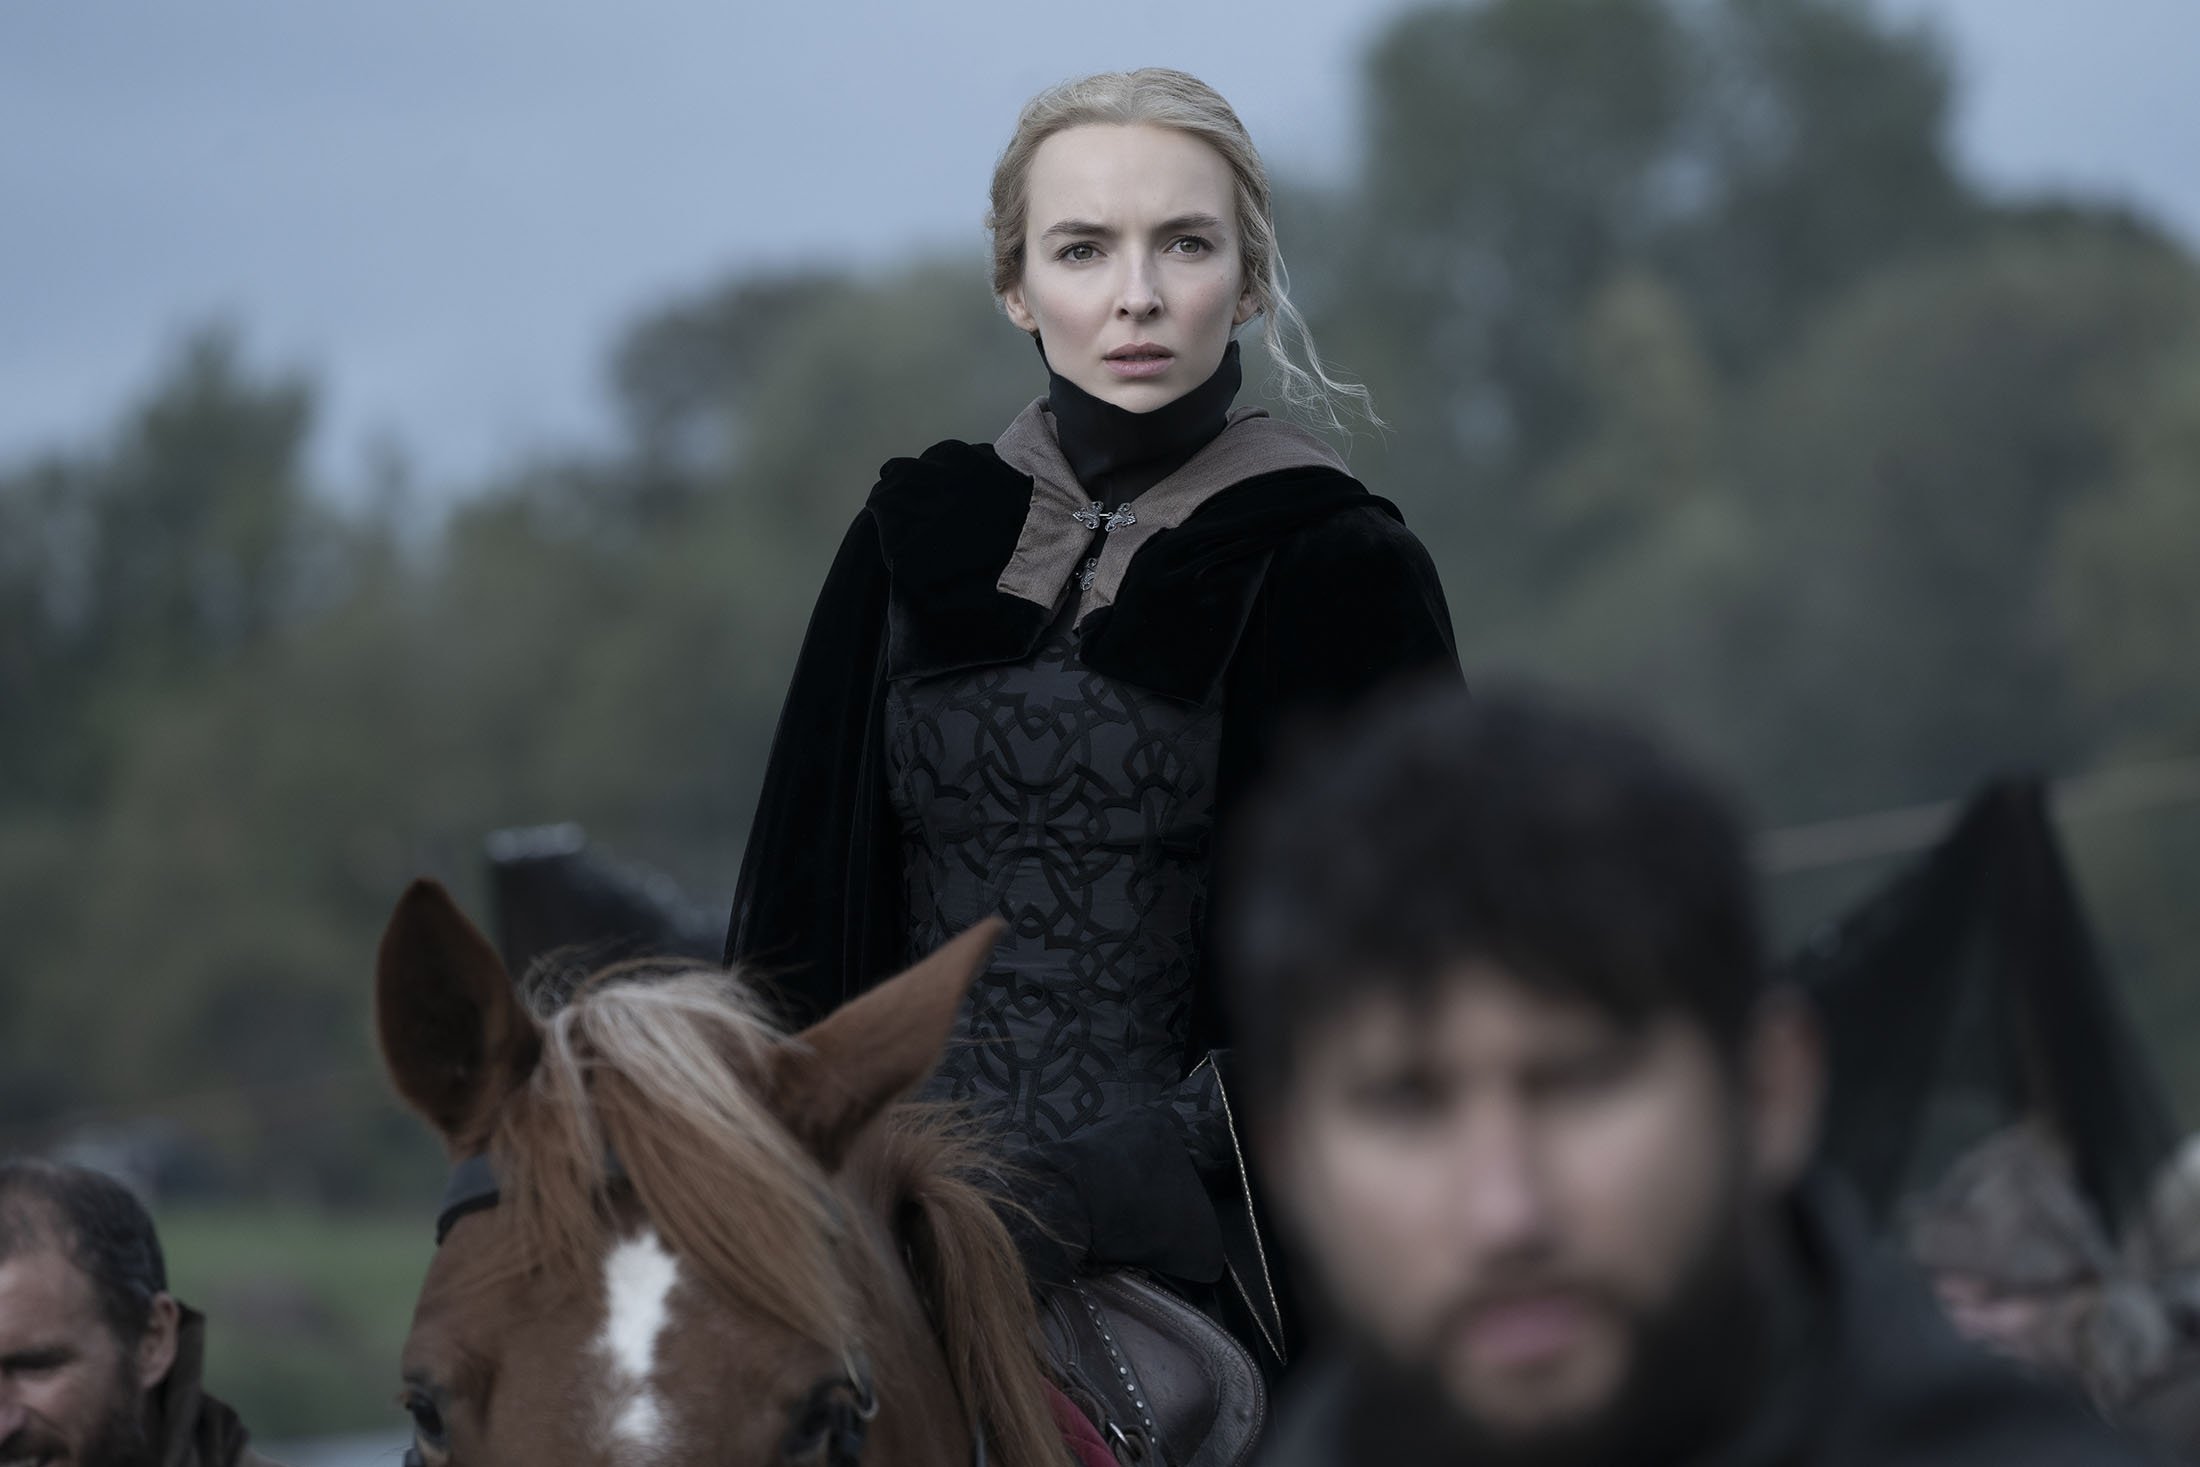 Jodie Comer as Marguerite de Carrouges rides a horse, in a scene from the film "The Last Duel." (20th Century Studios via AP)